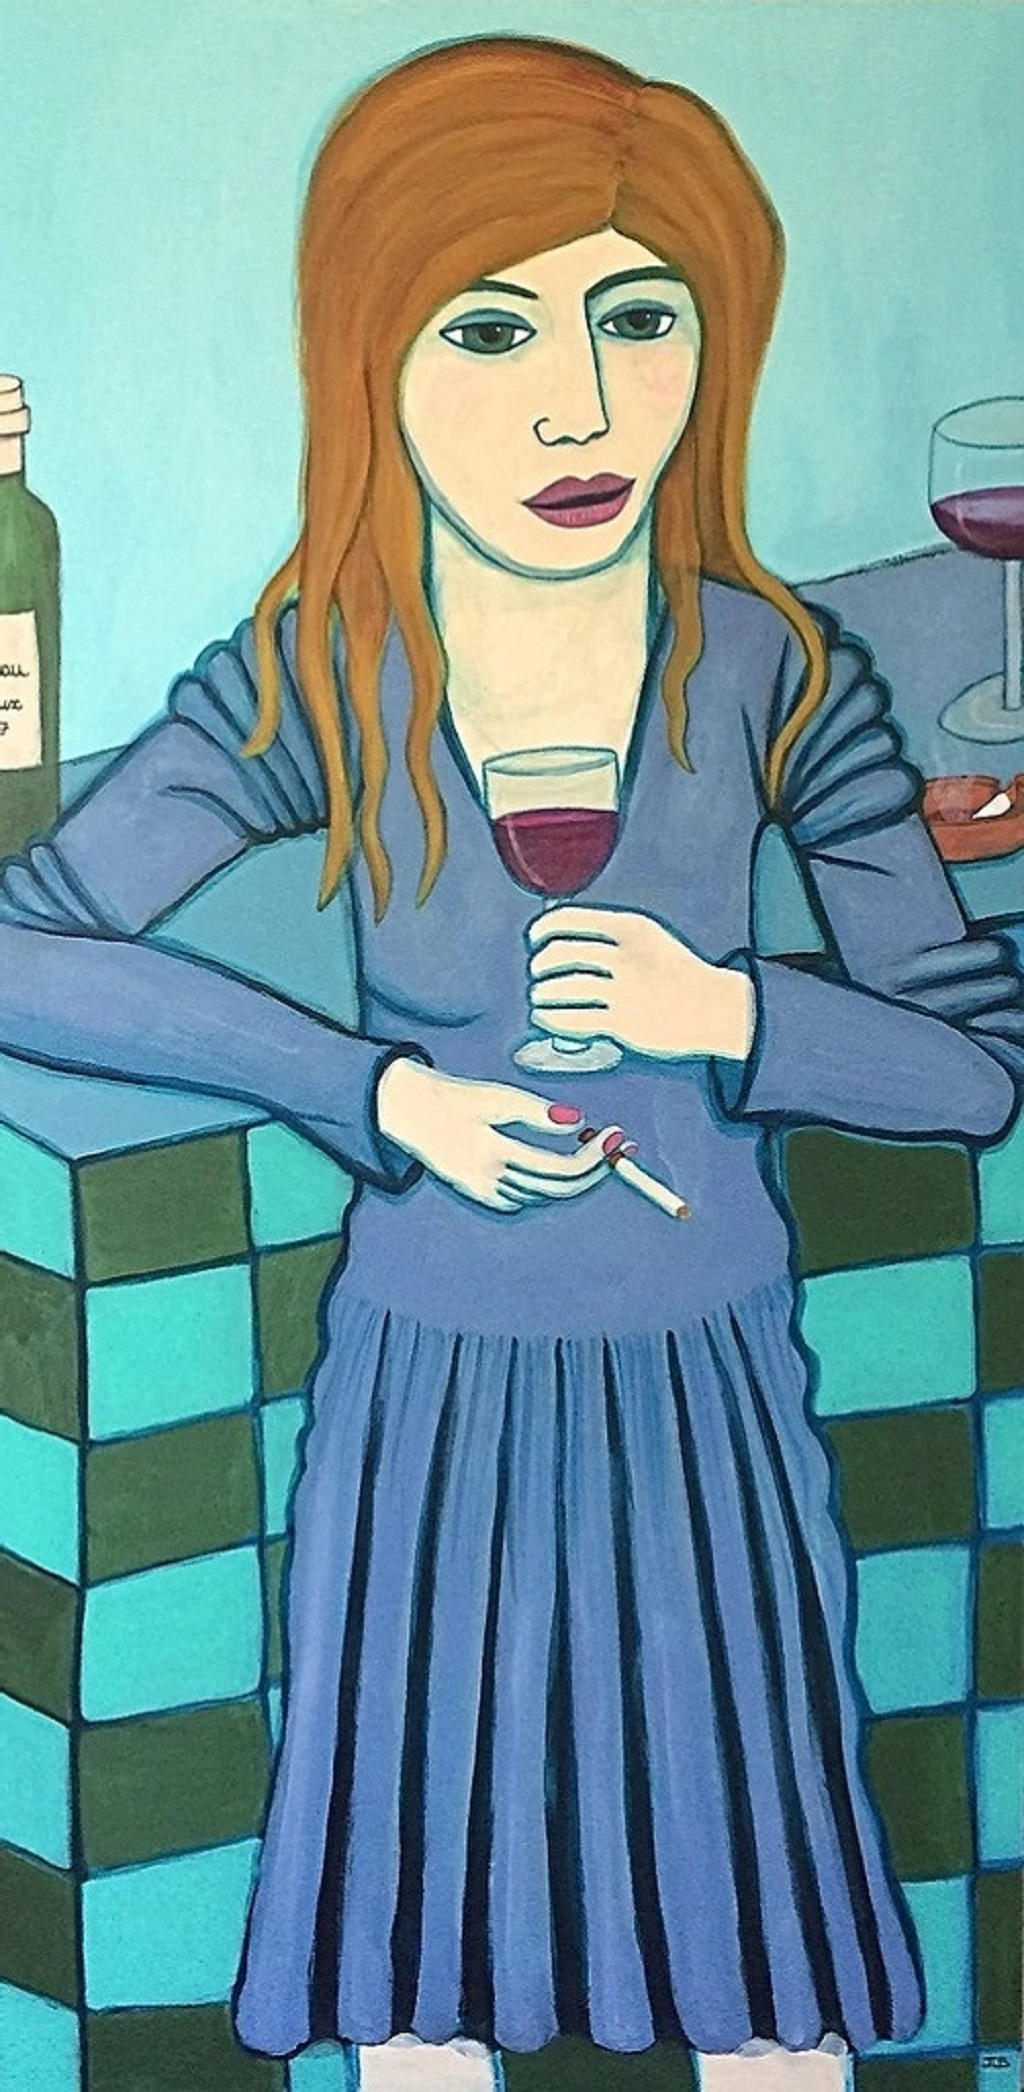 " Everyday, I have a drink" Acrylic on board by Juliette Lepage Boisdron